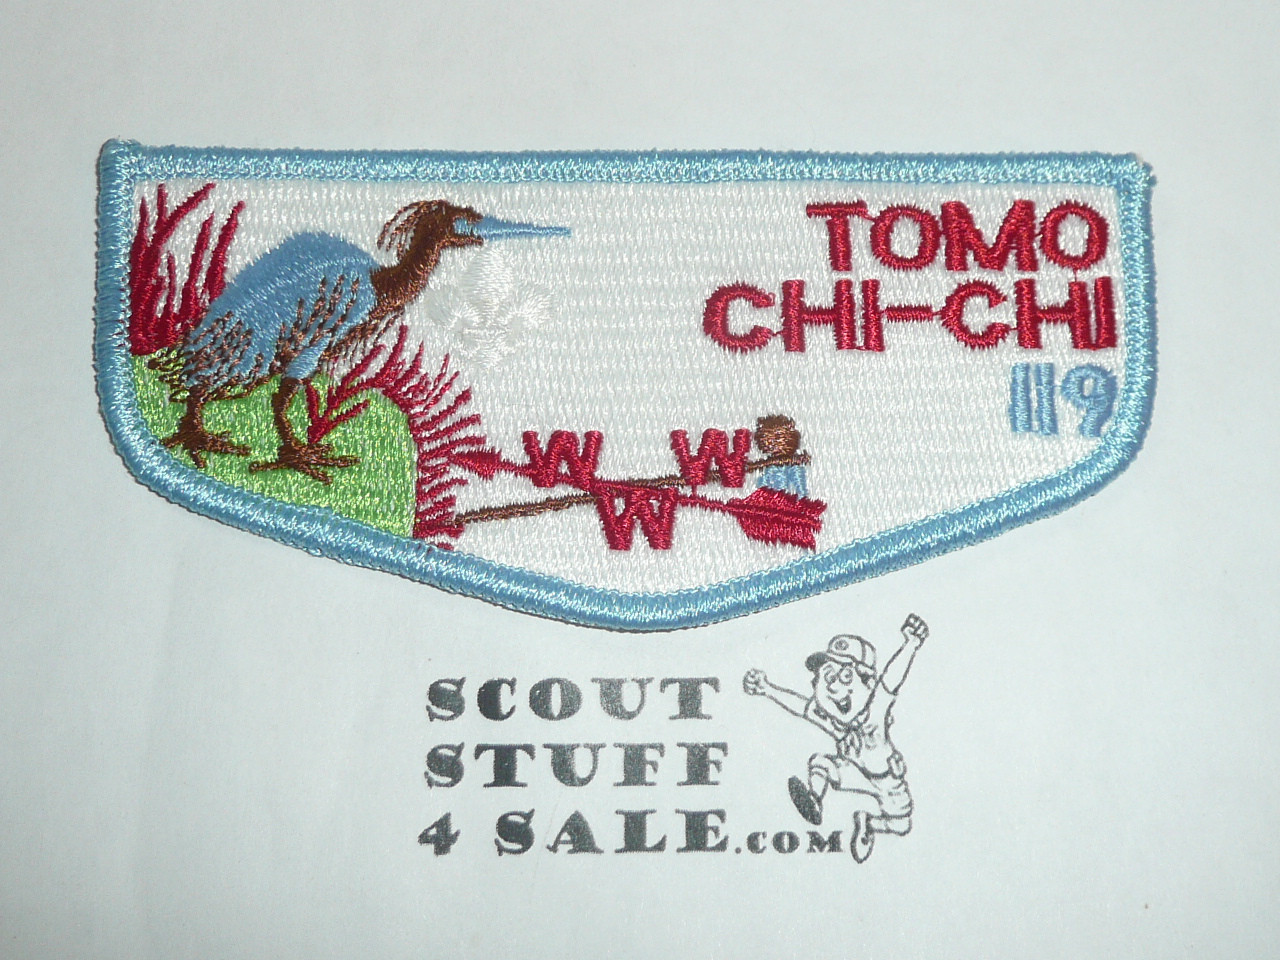 Order of the Arrow Lodge #119 Tomo Chi-Chi s17 Flap Patch